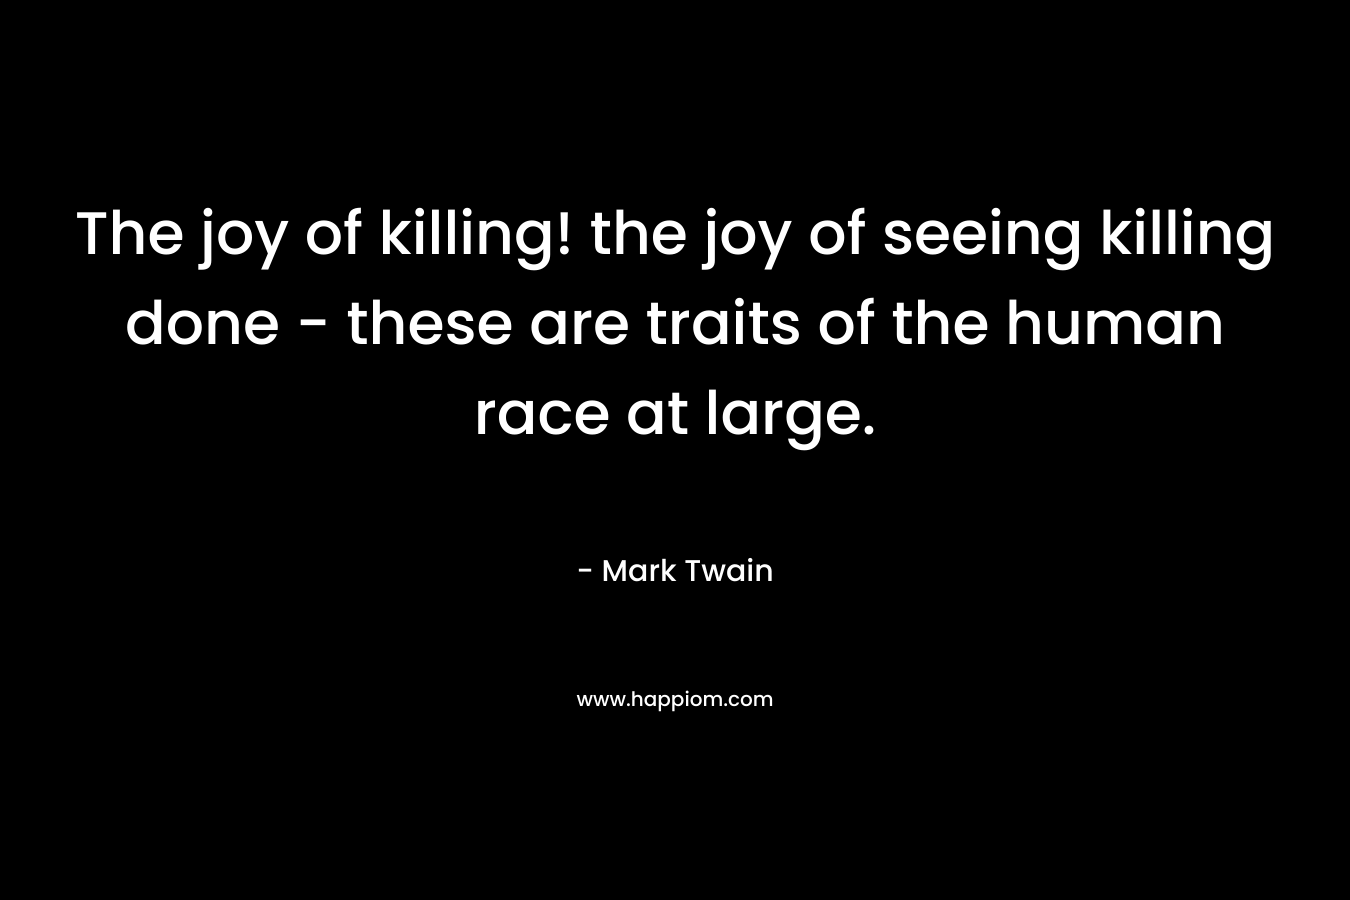 The joy of killing! the joy of seeing killing done - these are traits of the human race at large.